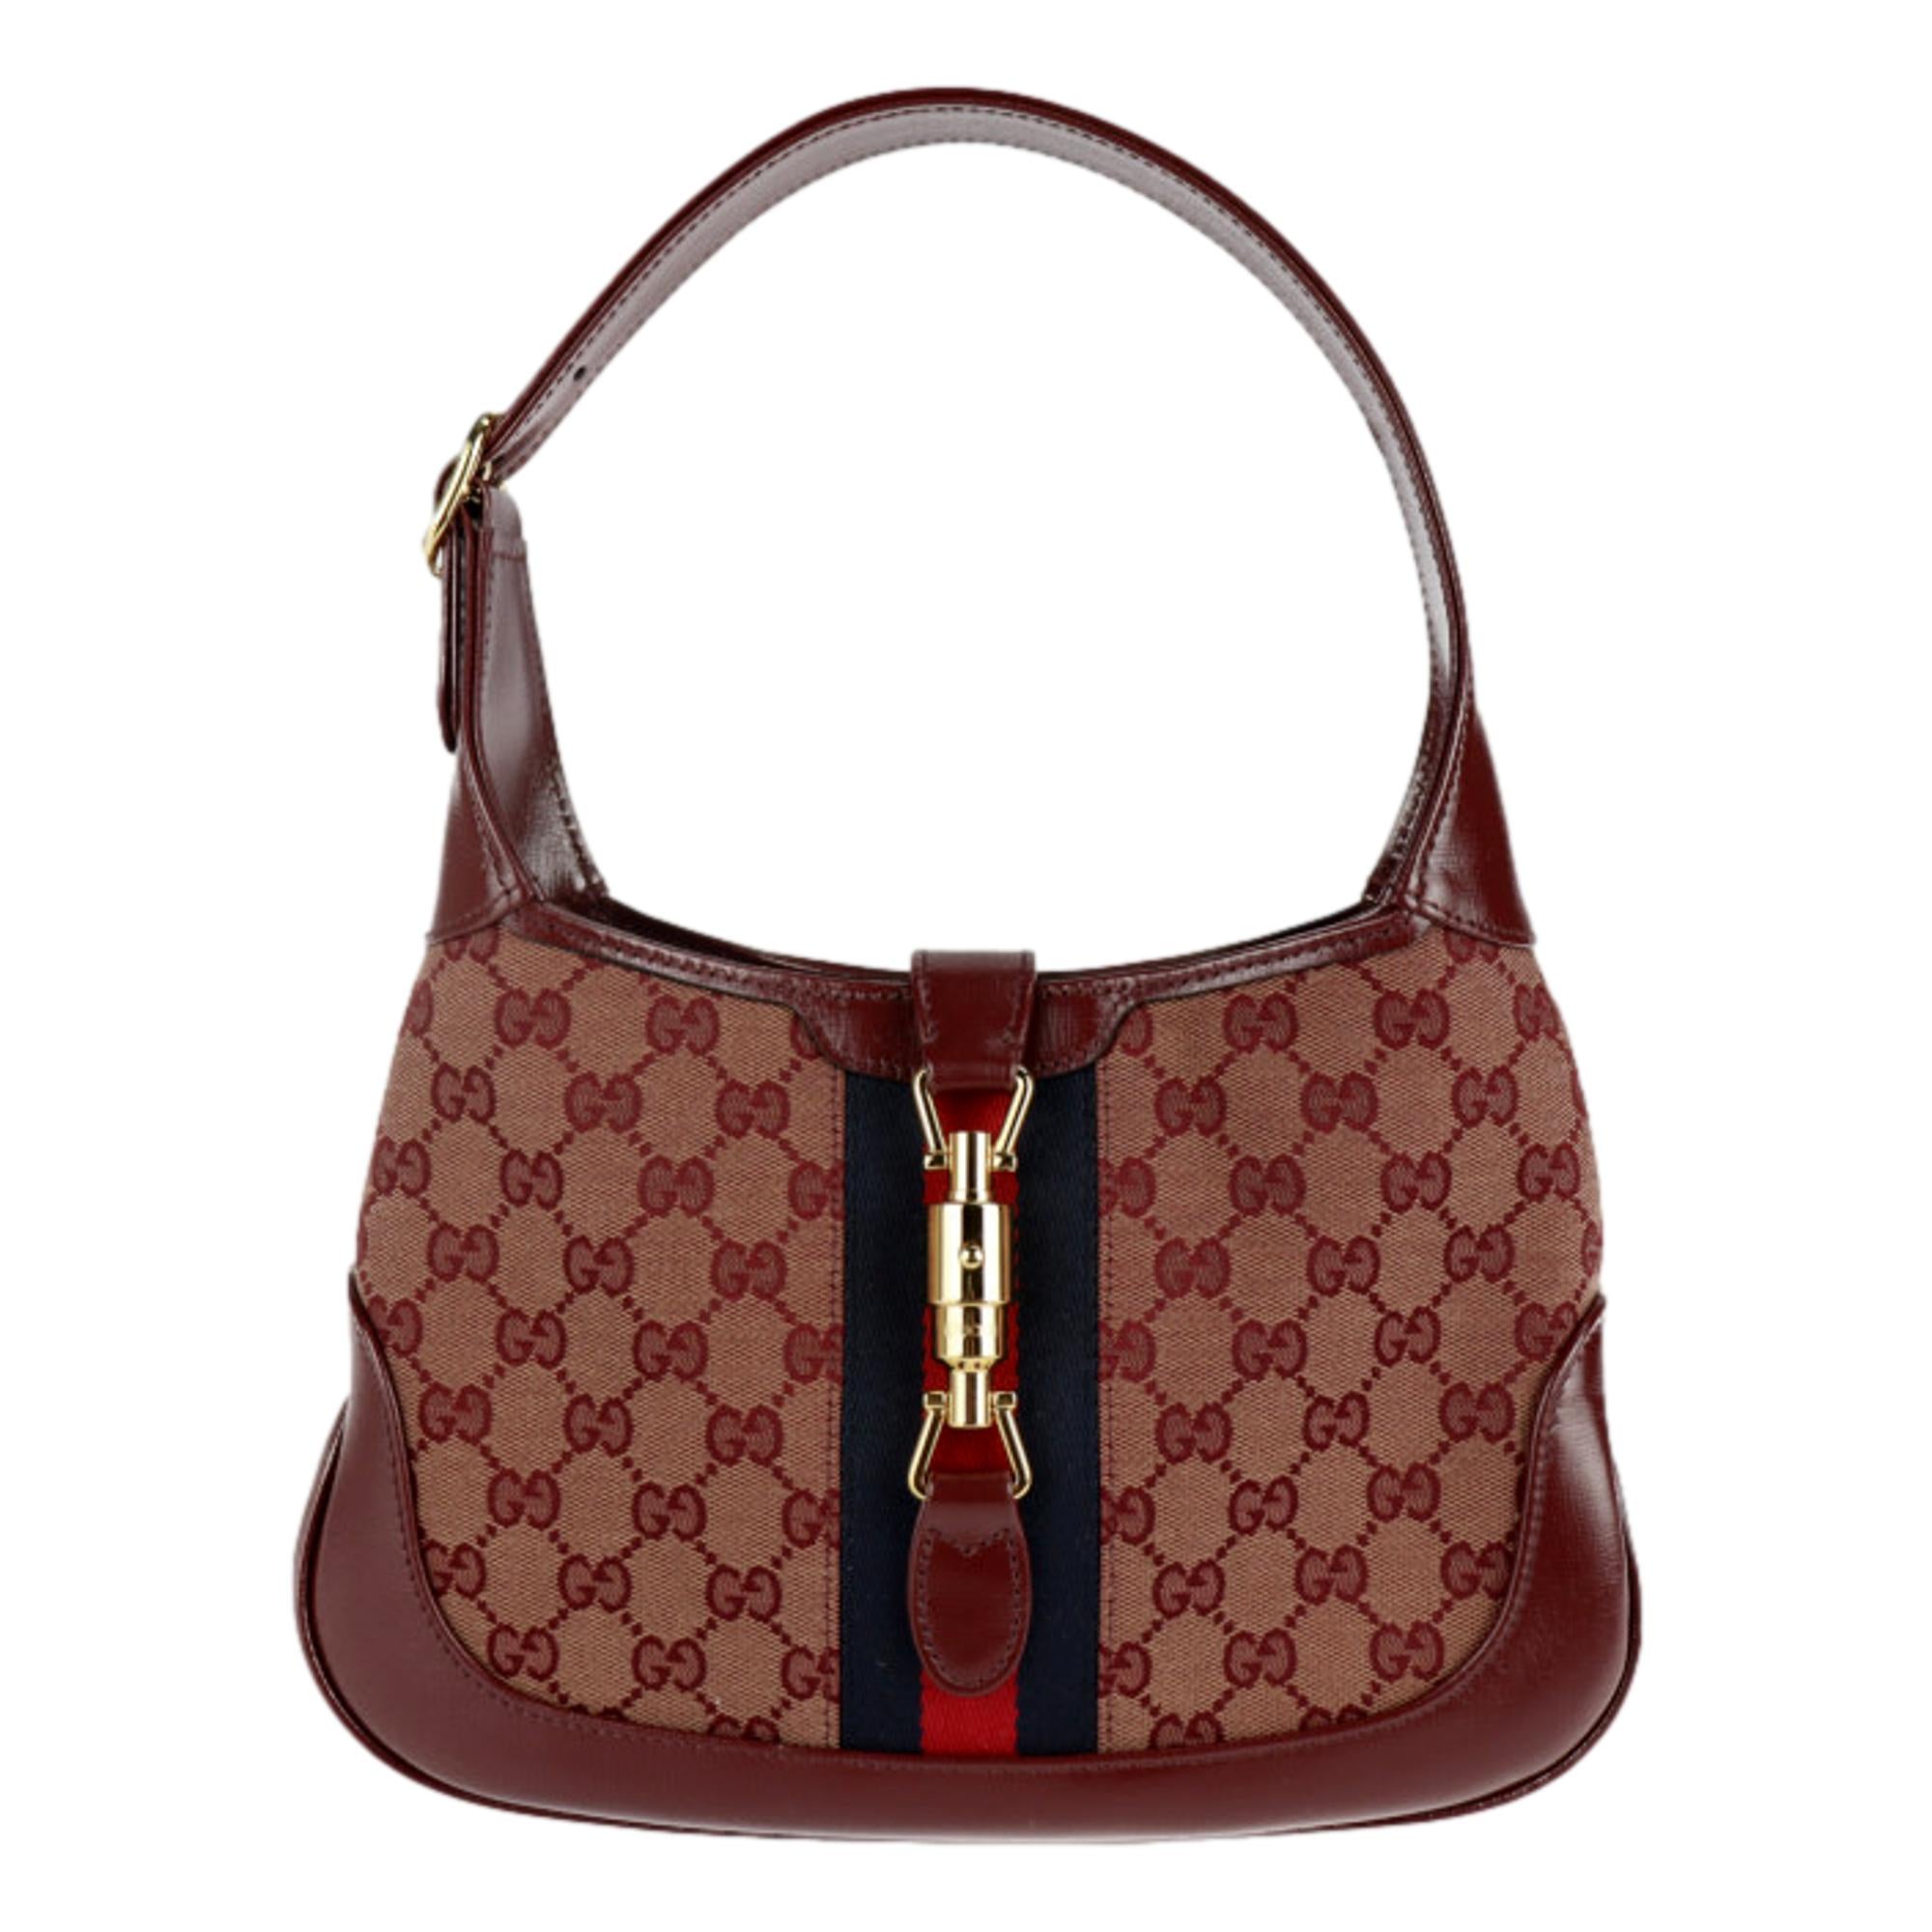 Gucci Jackie 1961 Small Tote Bag in GG Original Canvas 636706 at_Queen_Bee_of_Beverly_Hills